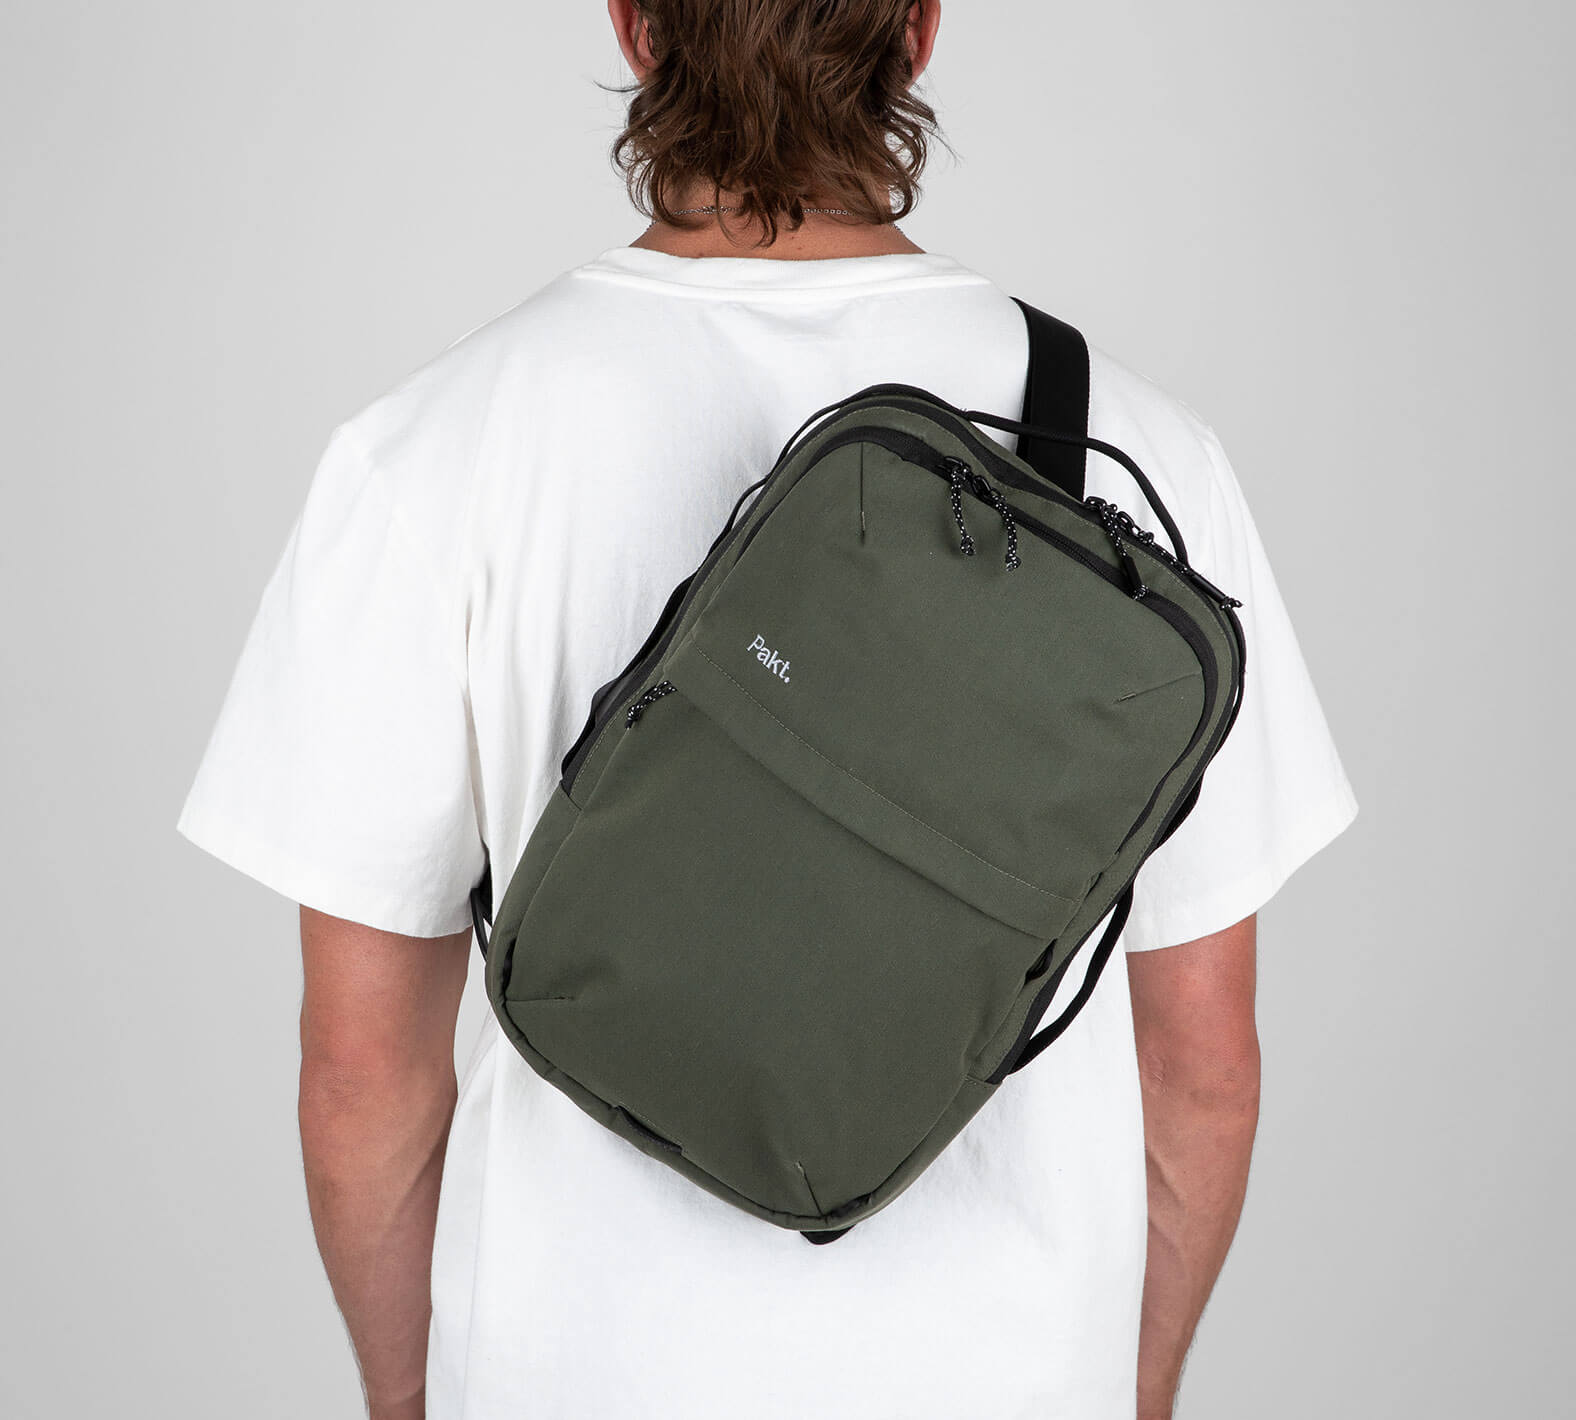 Man with green sling backpack